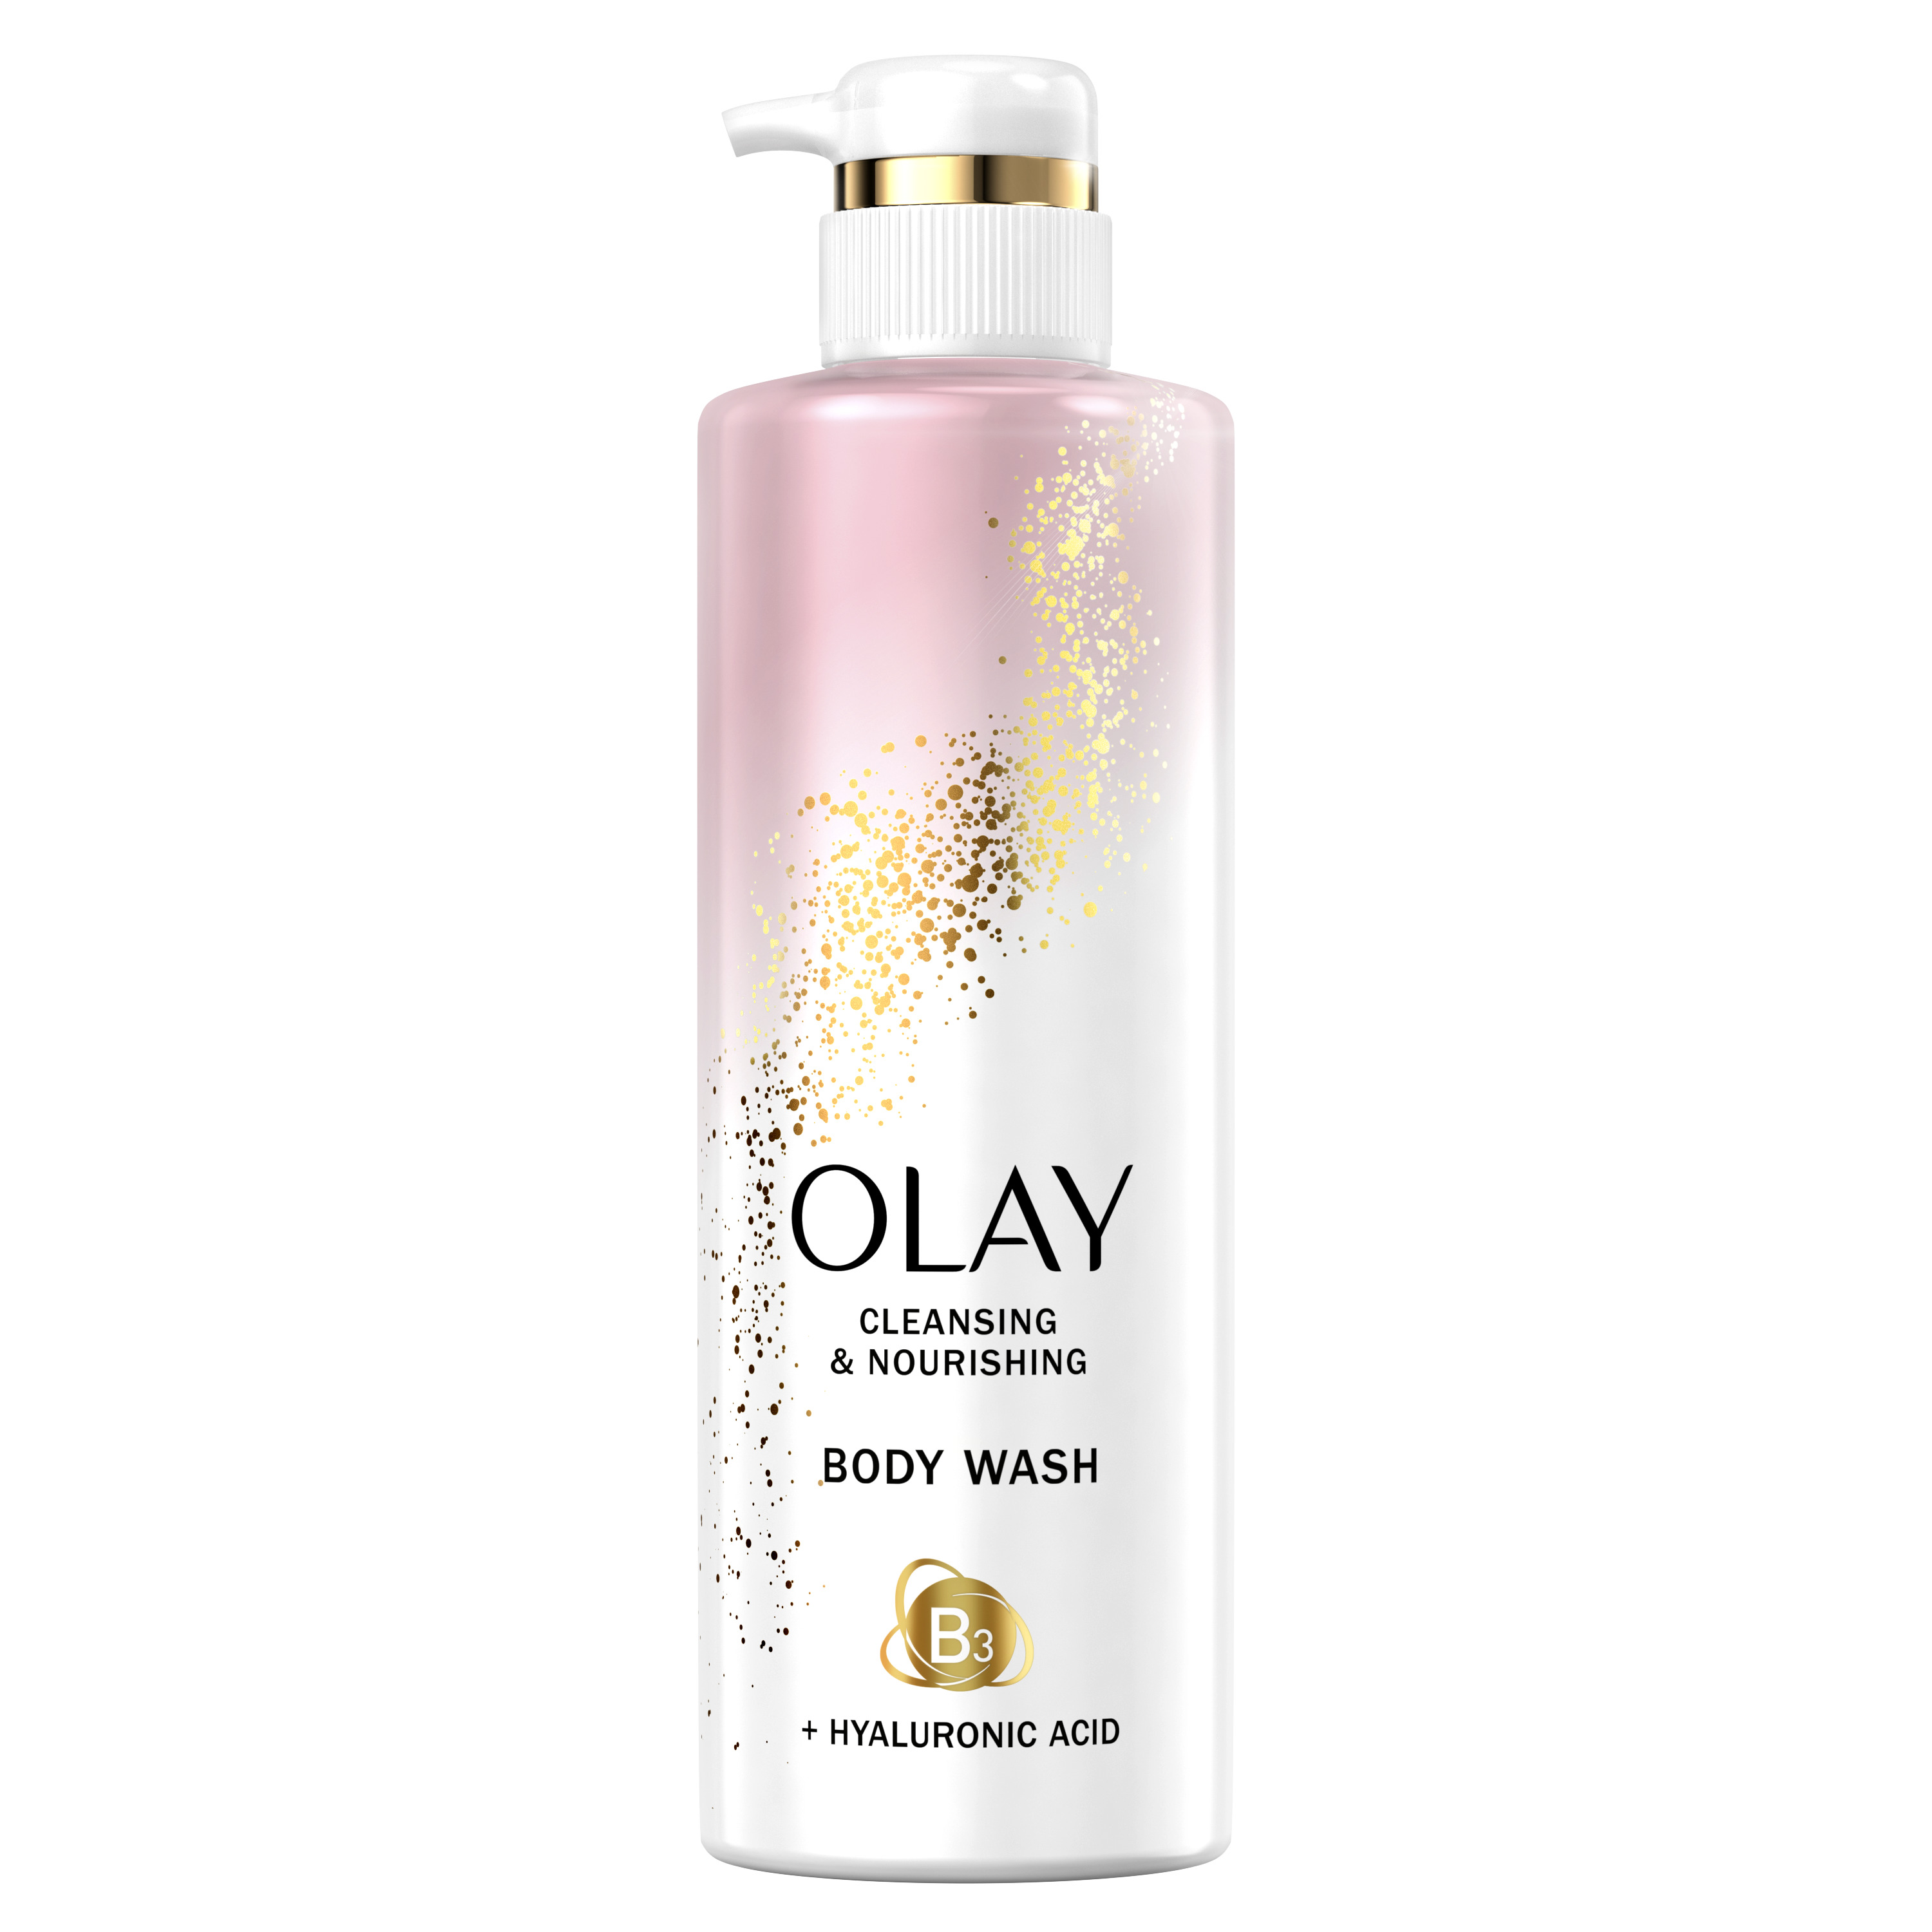 Olay Cleansing & Nourishing Body Wash with Vitamin B3 and Hyaluronic Acid, 17.9 fl oz - image 1 of 6